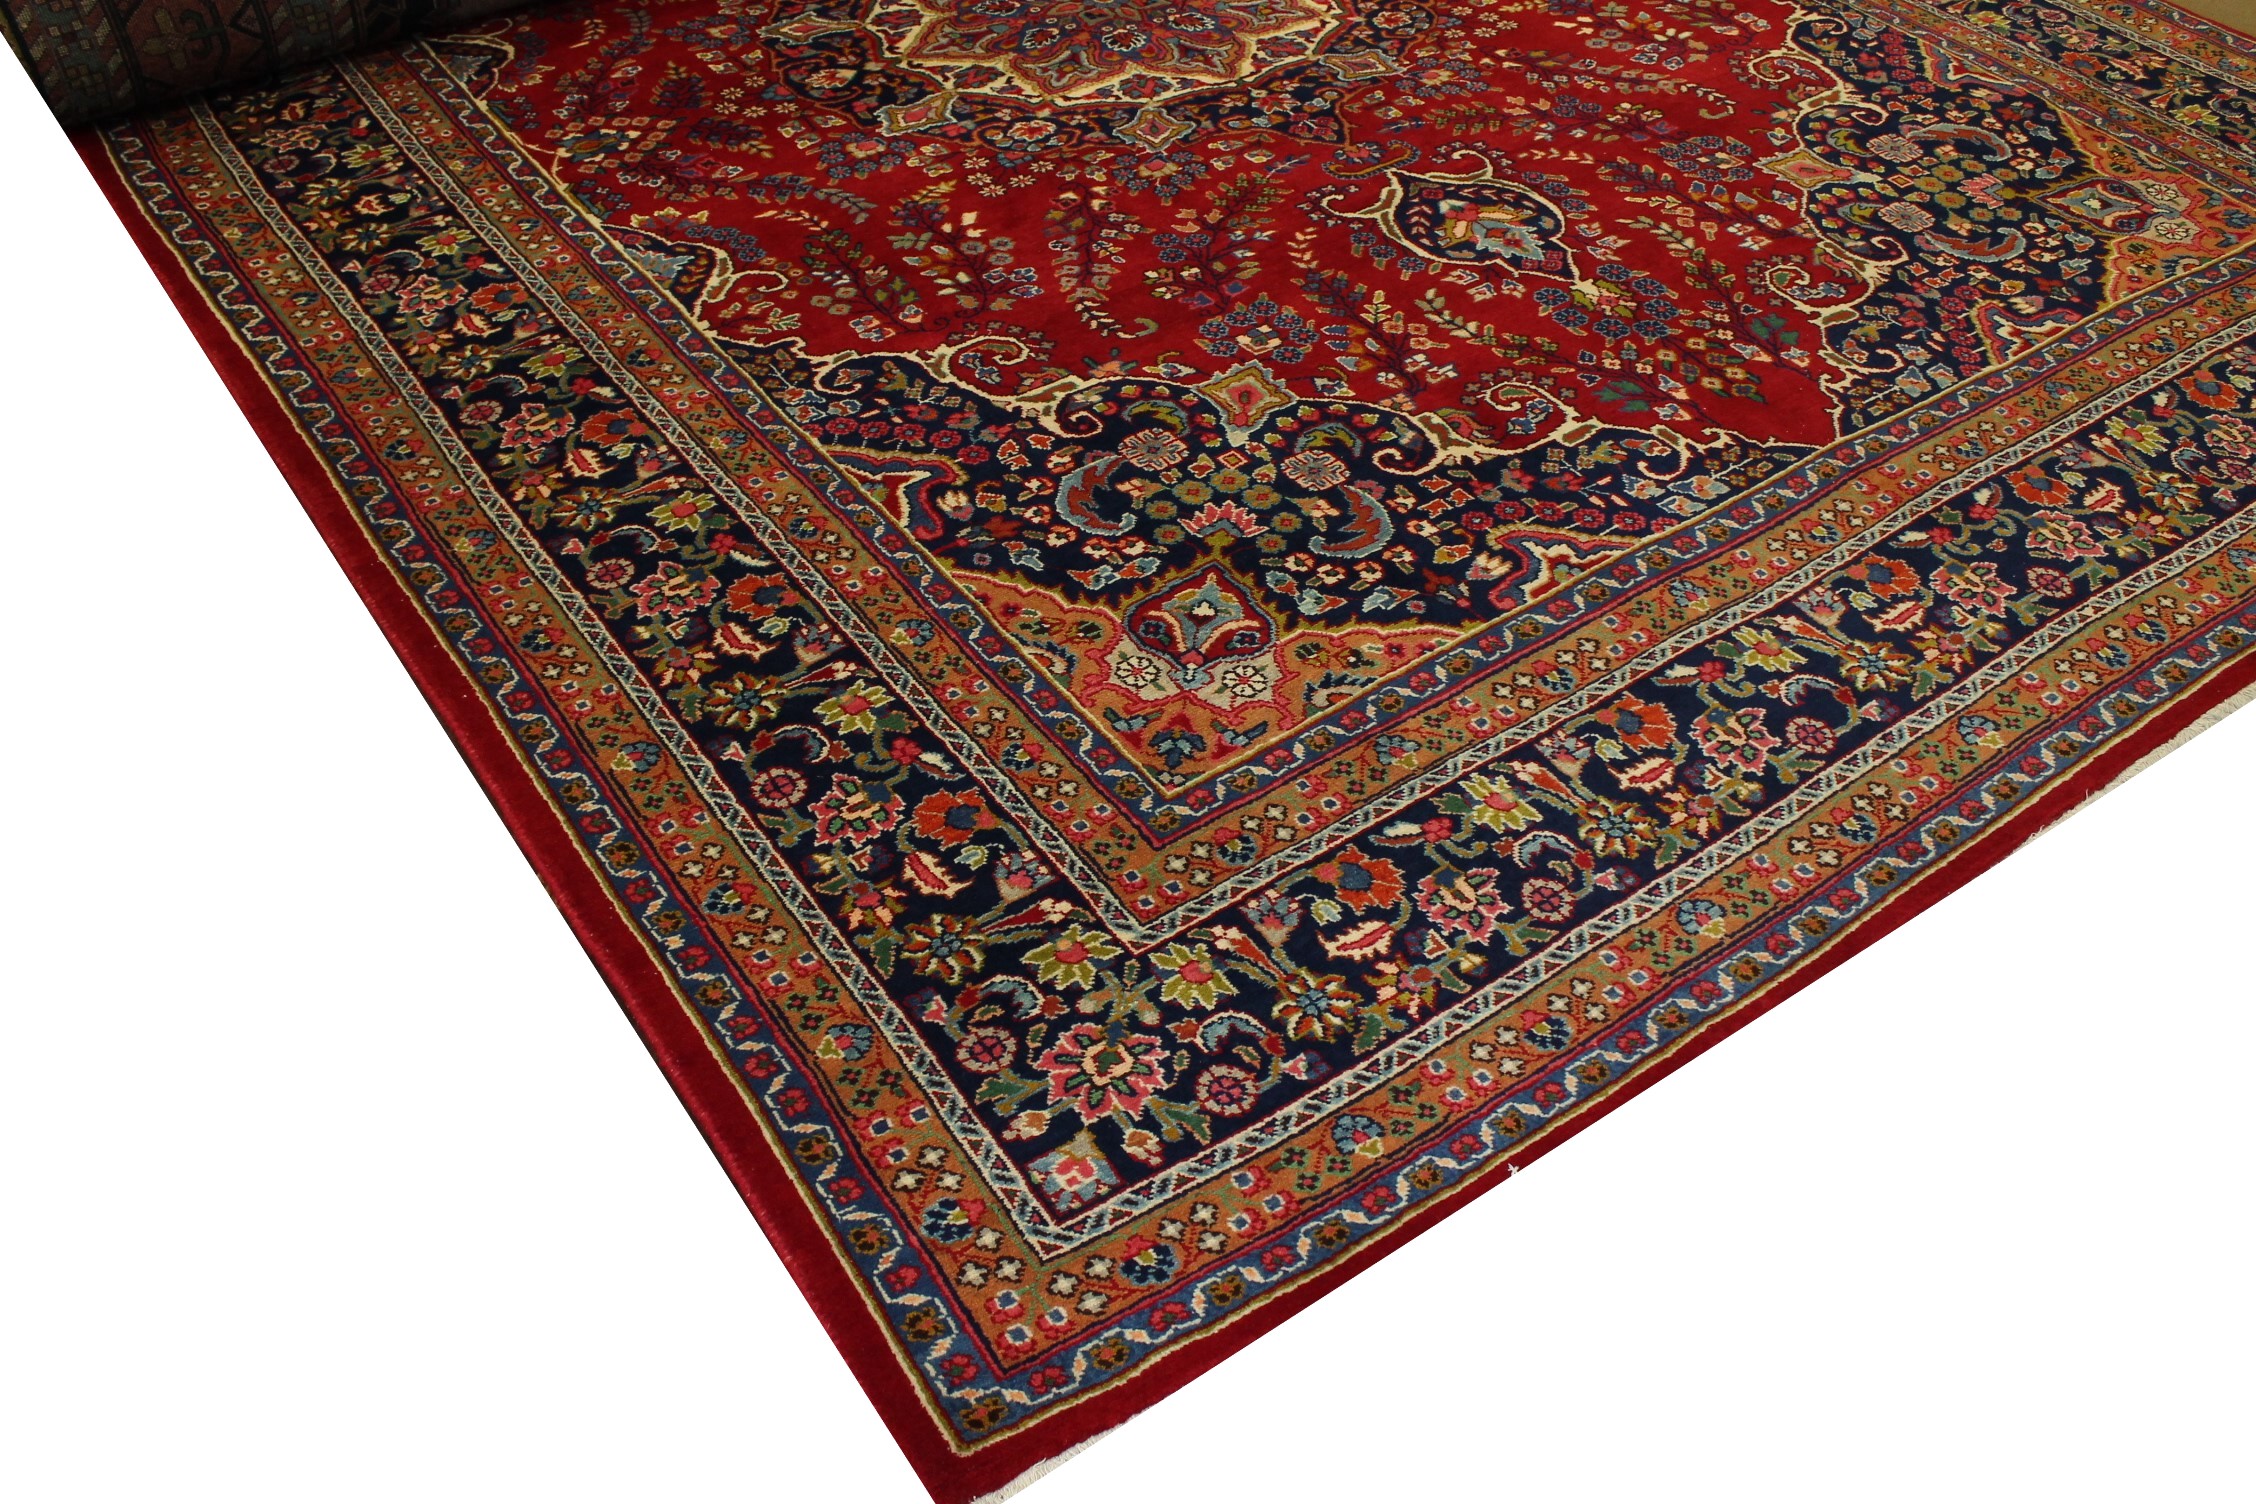 Clearance & Discount Rugs Traditional Hand Knotted Wool Rug 7234 Red - Burgundy & Medium Blue - Navy Hand Knotted Rug